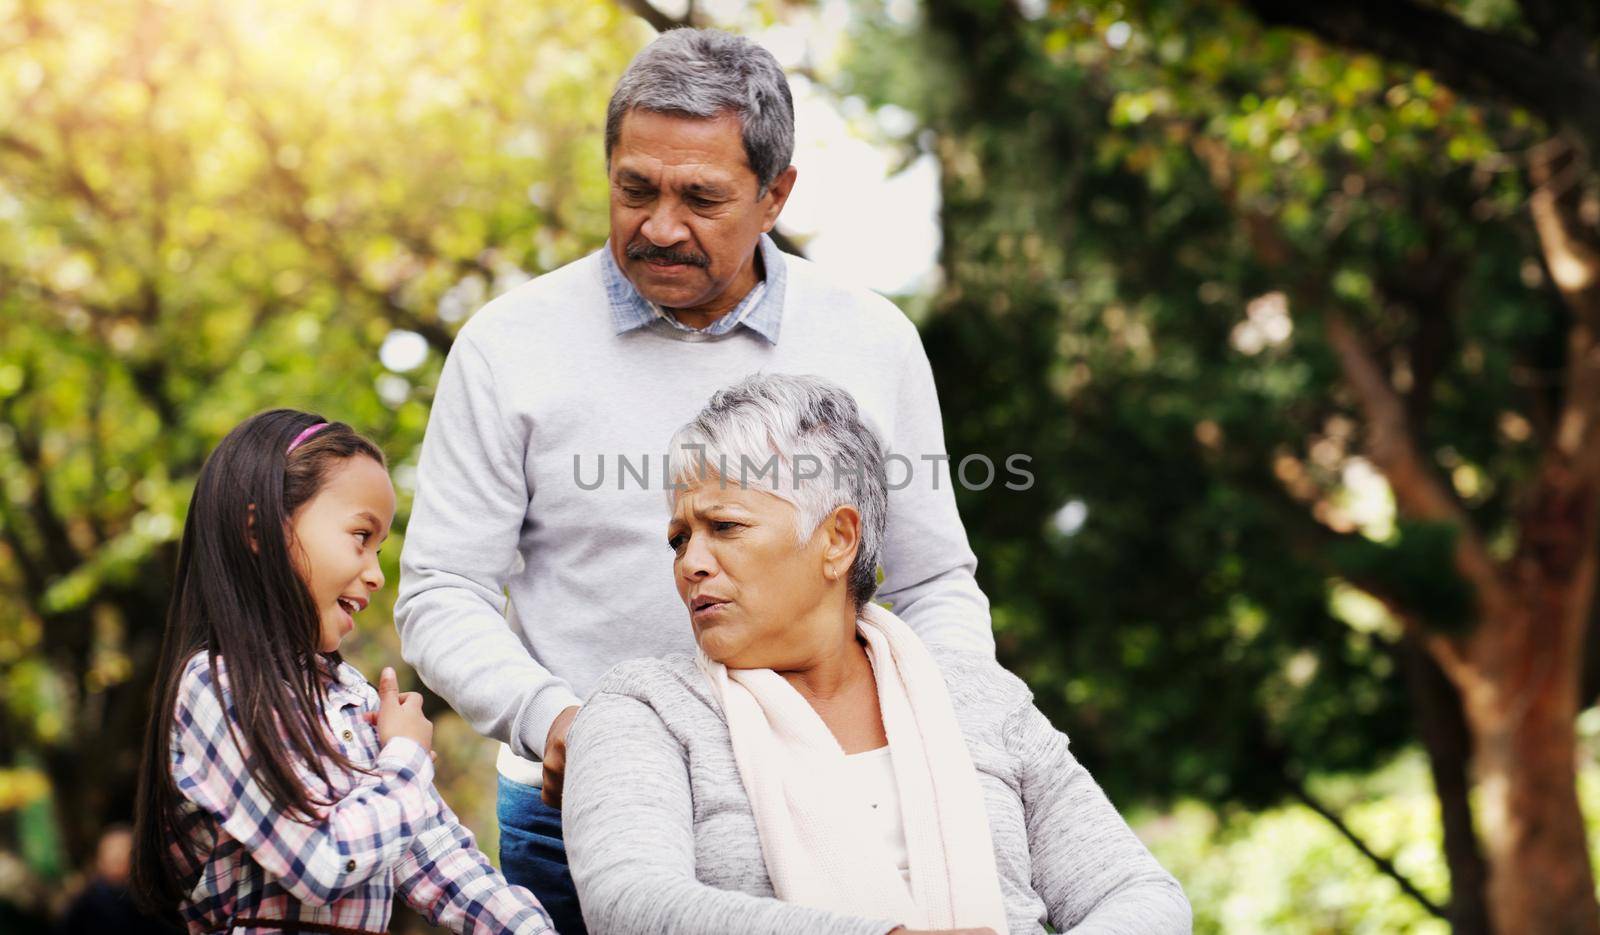 She always has interesting stories to tell us. an adorable little girl spending some time with her grandparents at the park. by YuriArcurs